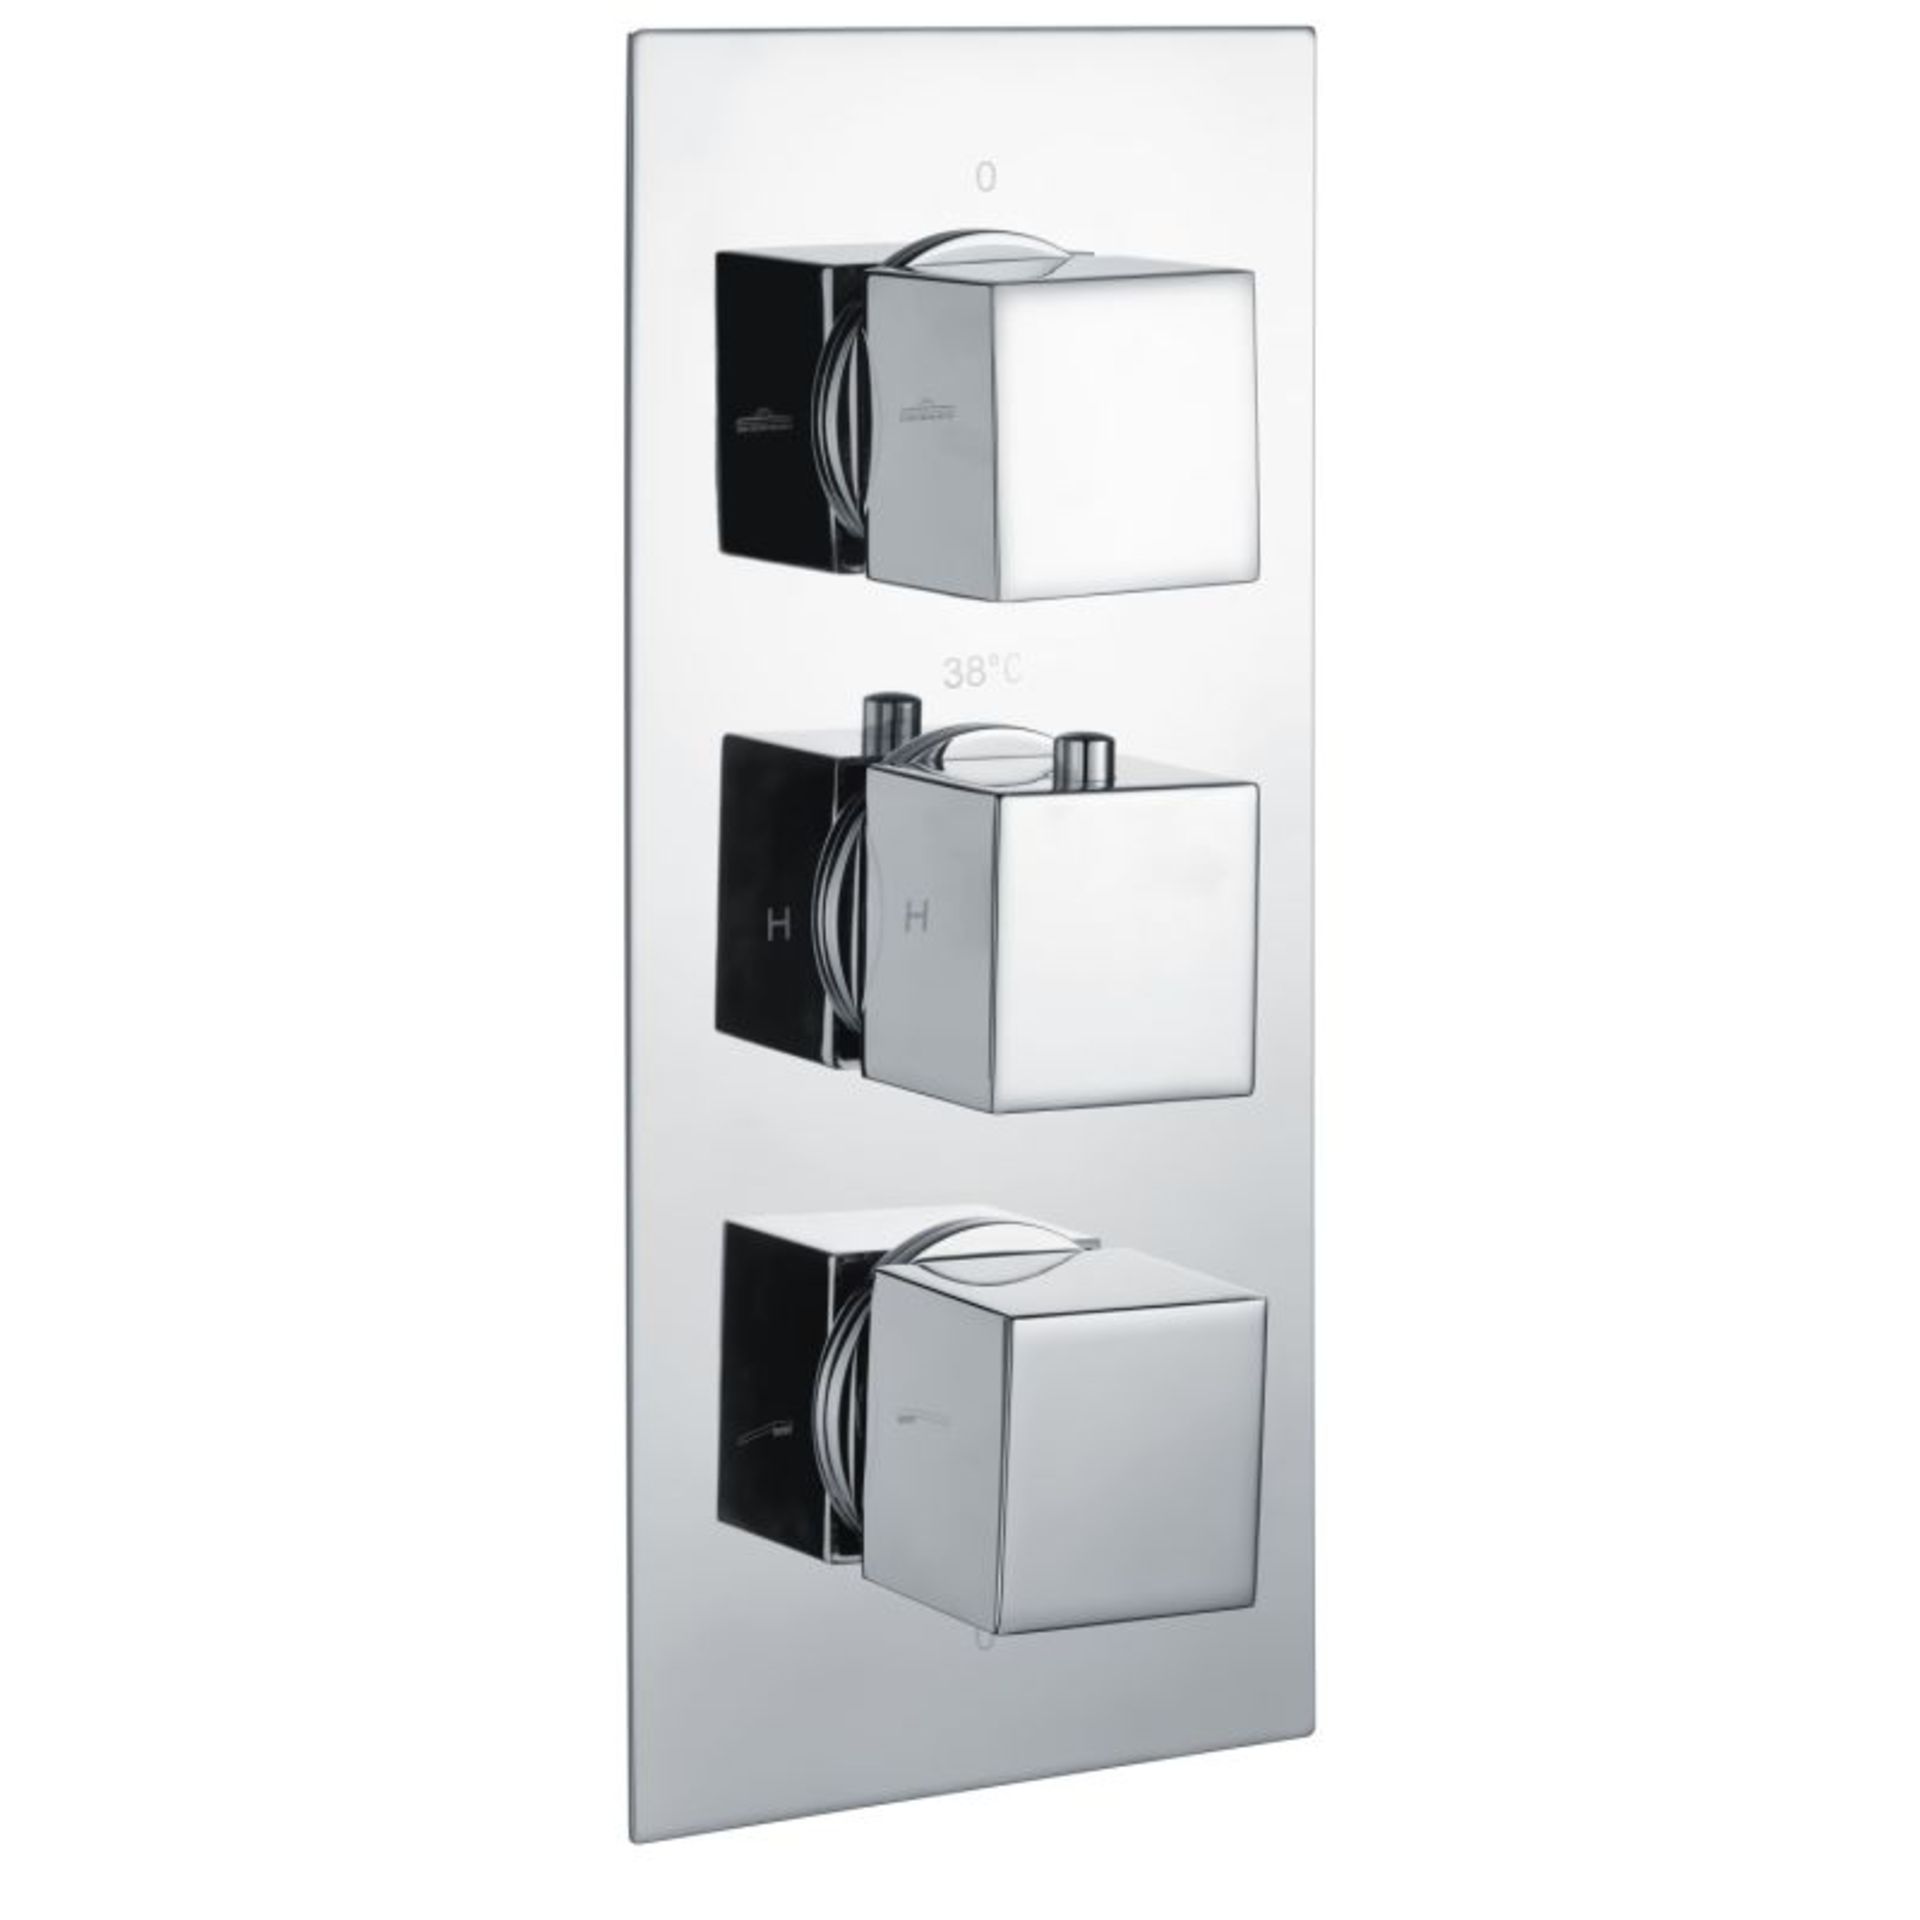 New (T166) Thermostatic Concealed Shower Valve Square Handle 2 Way.